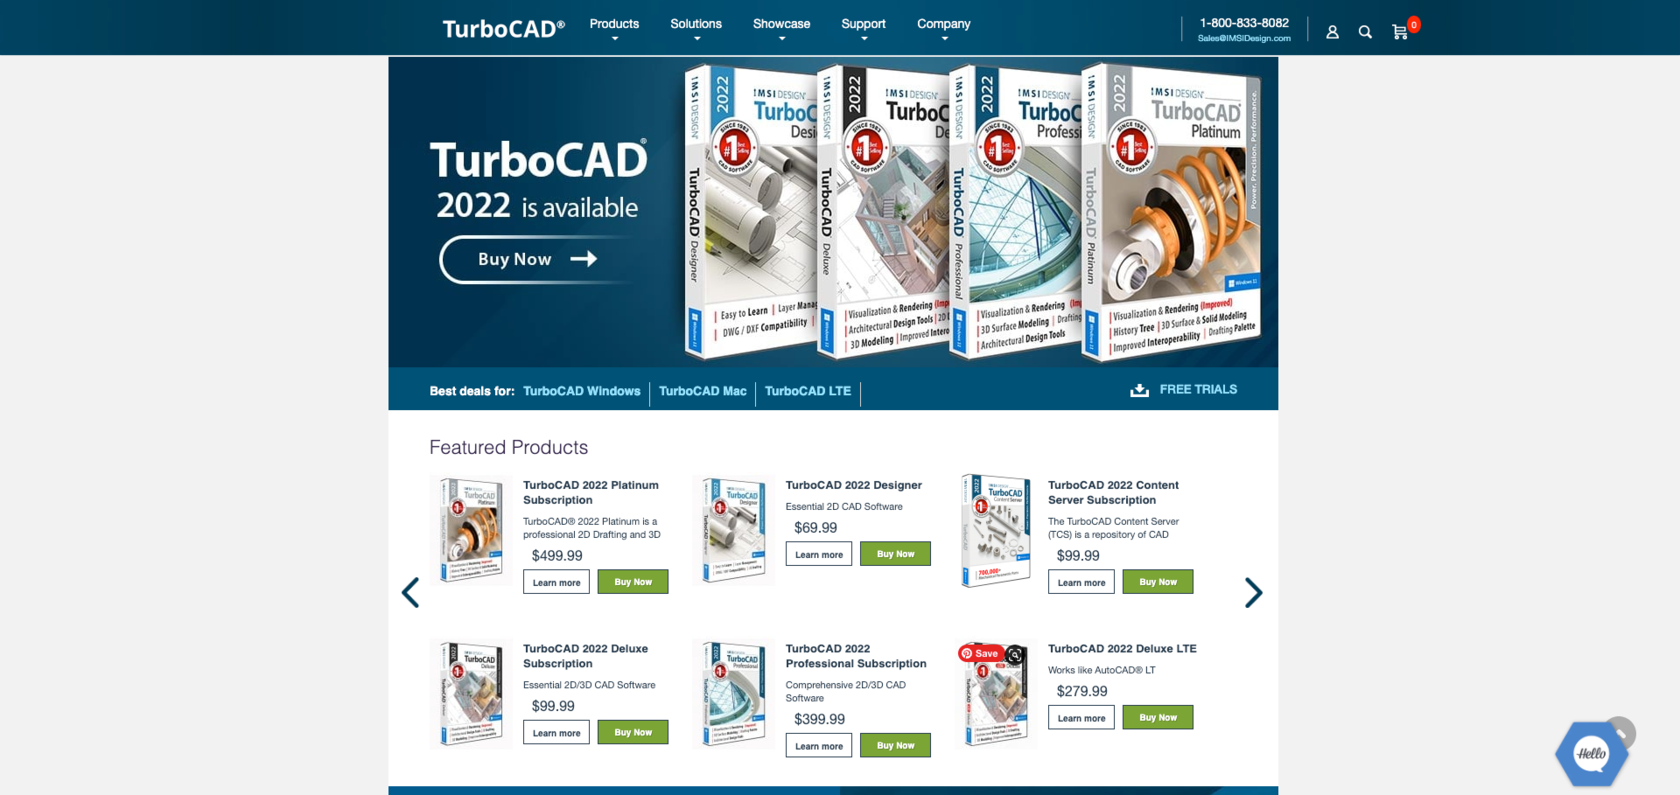  TurboCAD: Model and sketch 3D shapes in real-time with the advanced design tools of TurboCAD.